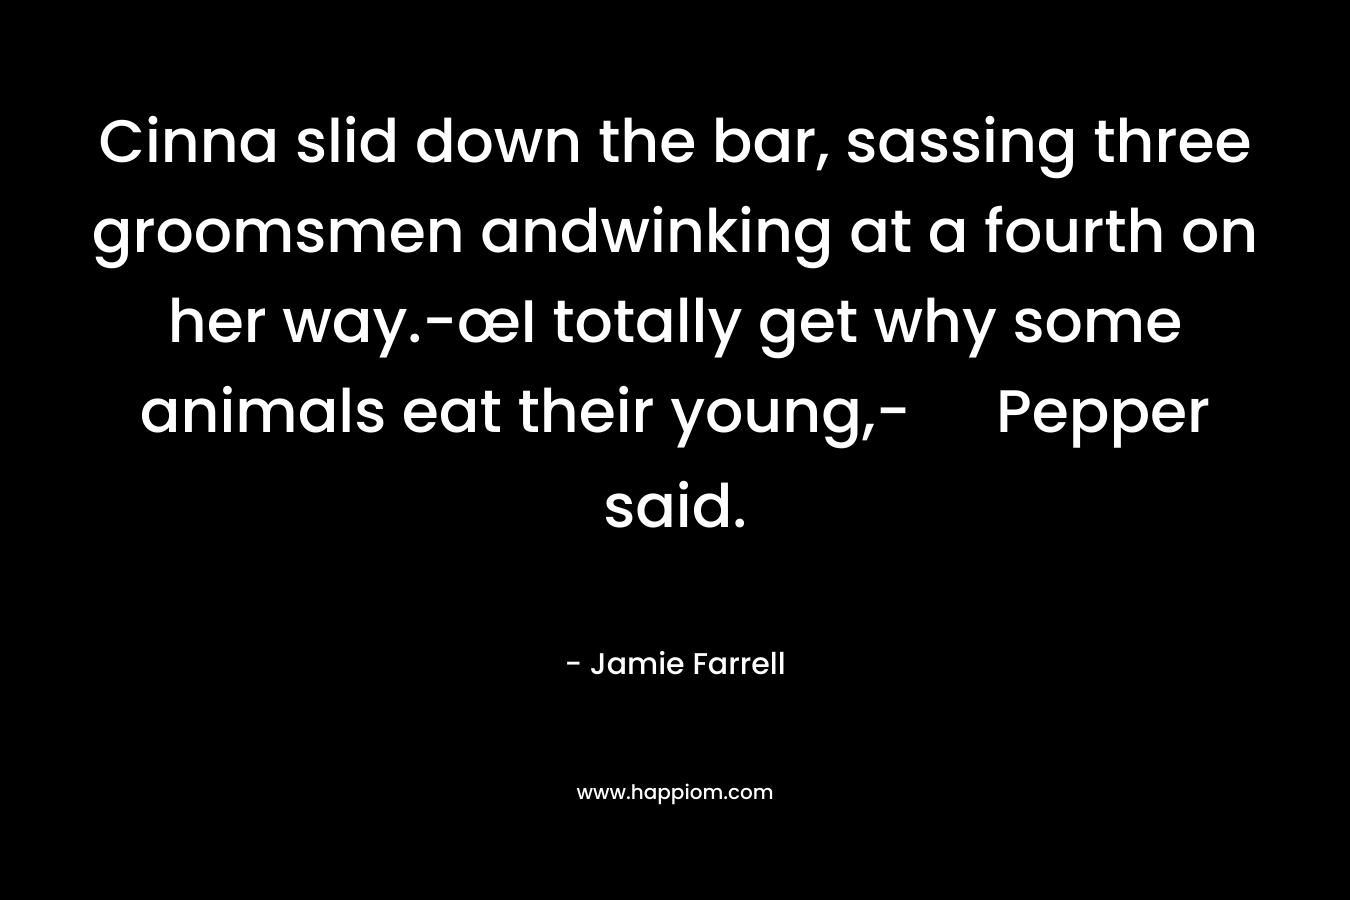 Cinna slid down the bar, sassing three groomsmen andwinking at a fourth on her way.-œI totally get why some animals eat their young,- Pepper said. – Jamie Farrell